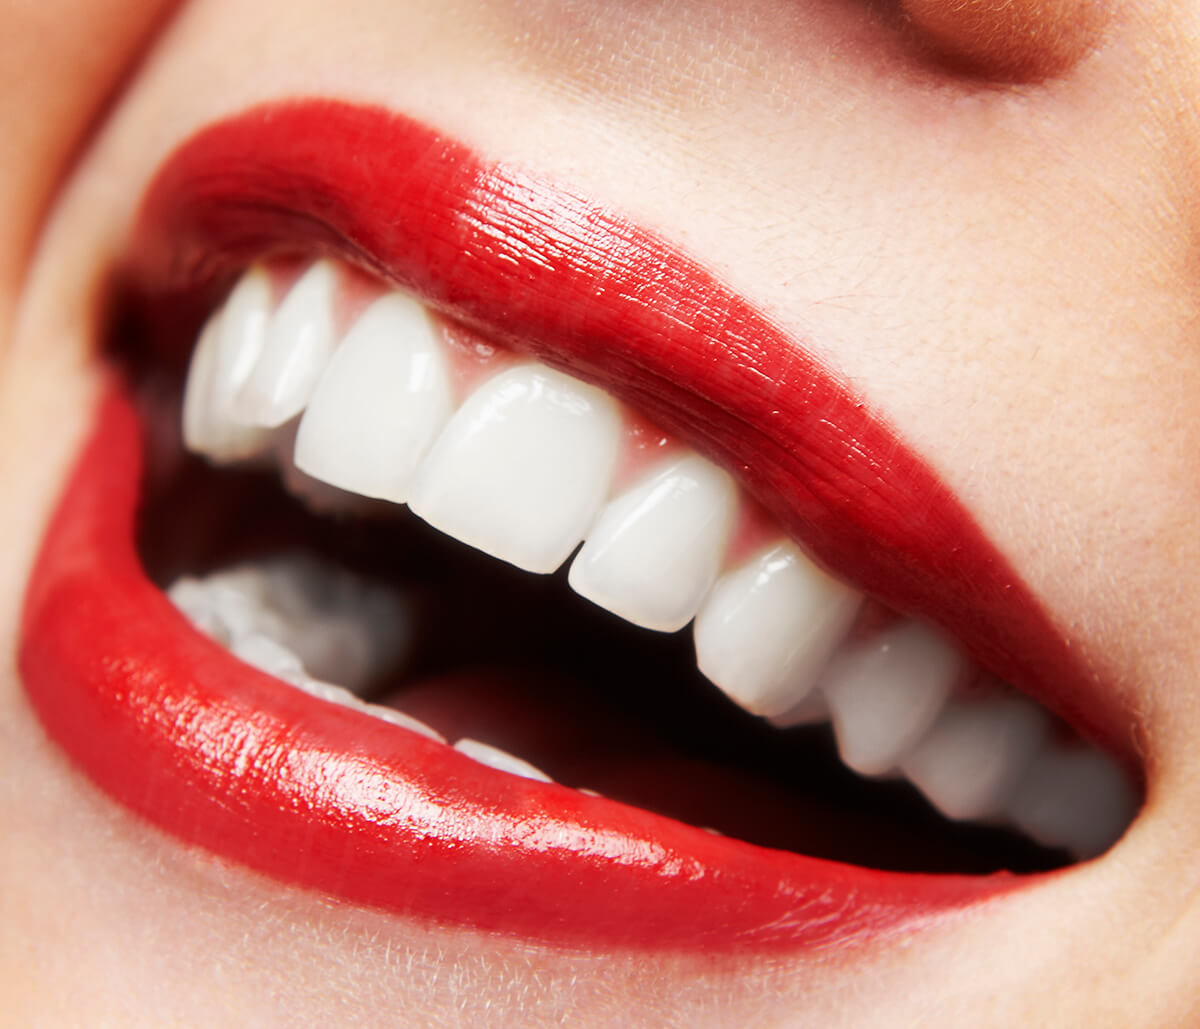 Cosmetic Dentist in Houston Discusses Latest AACD Statistics and Choosing the Right Practice